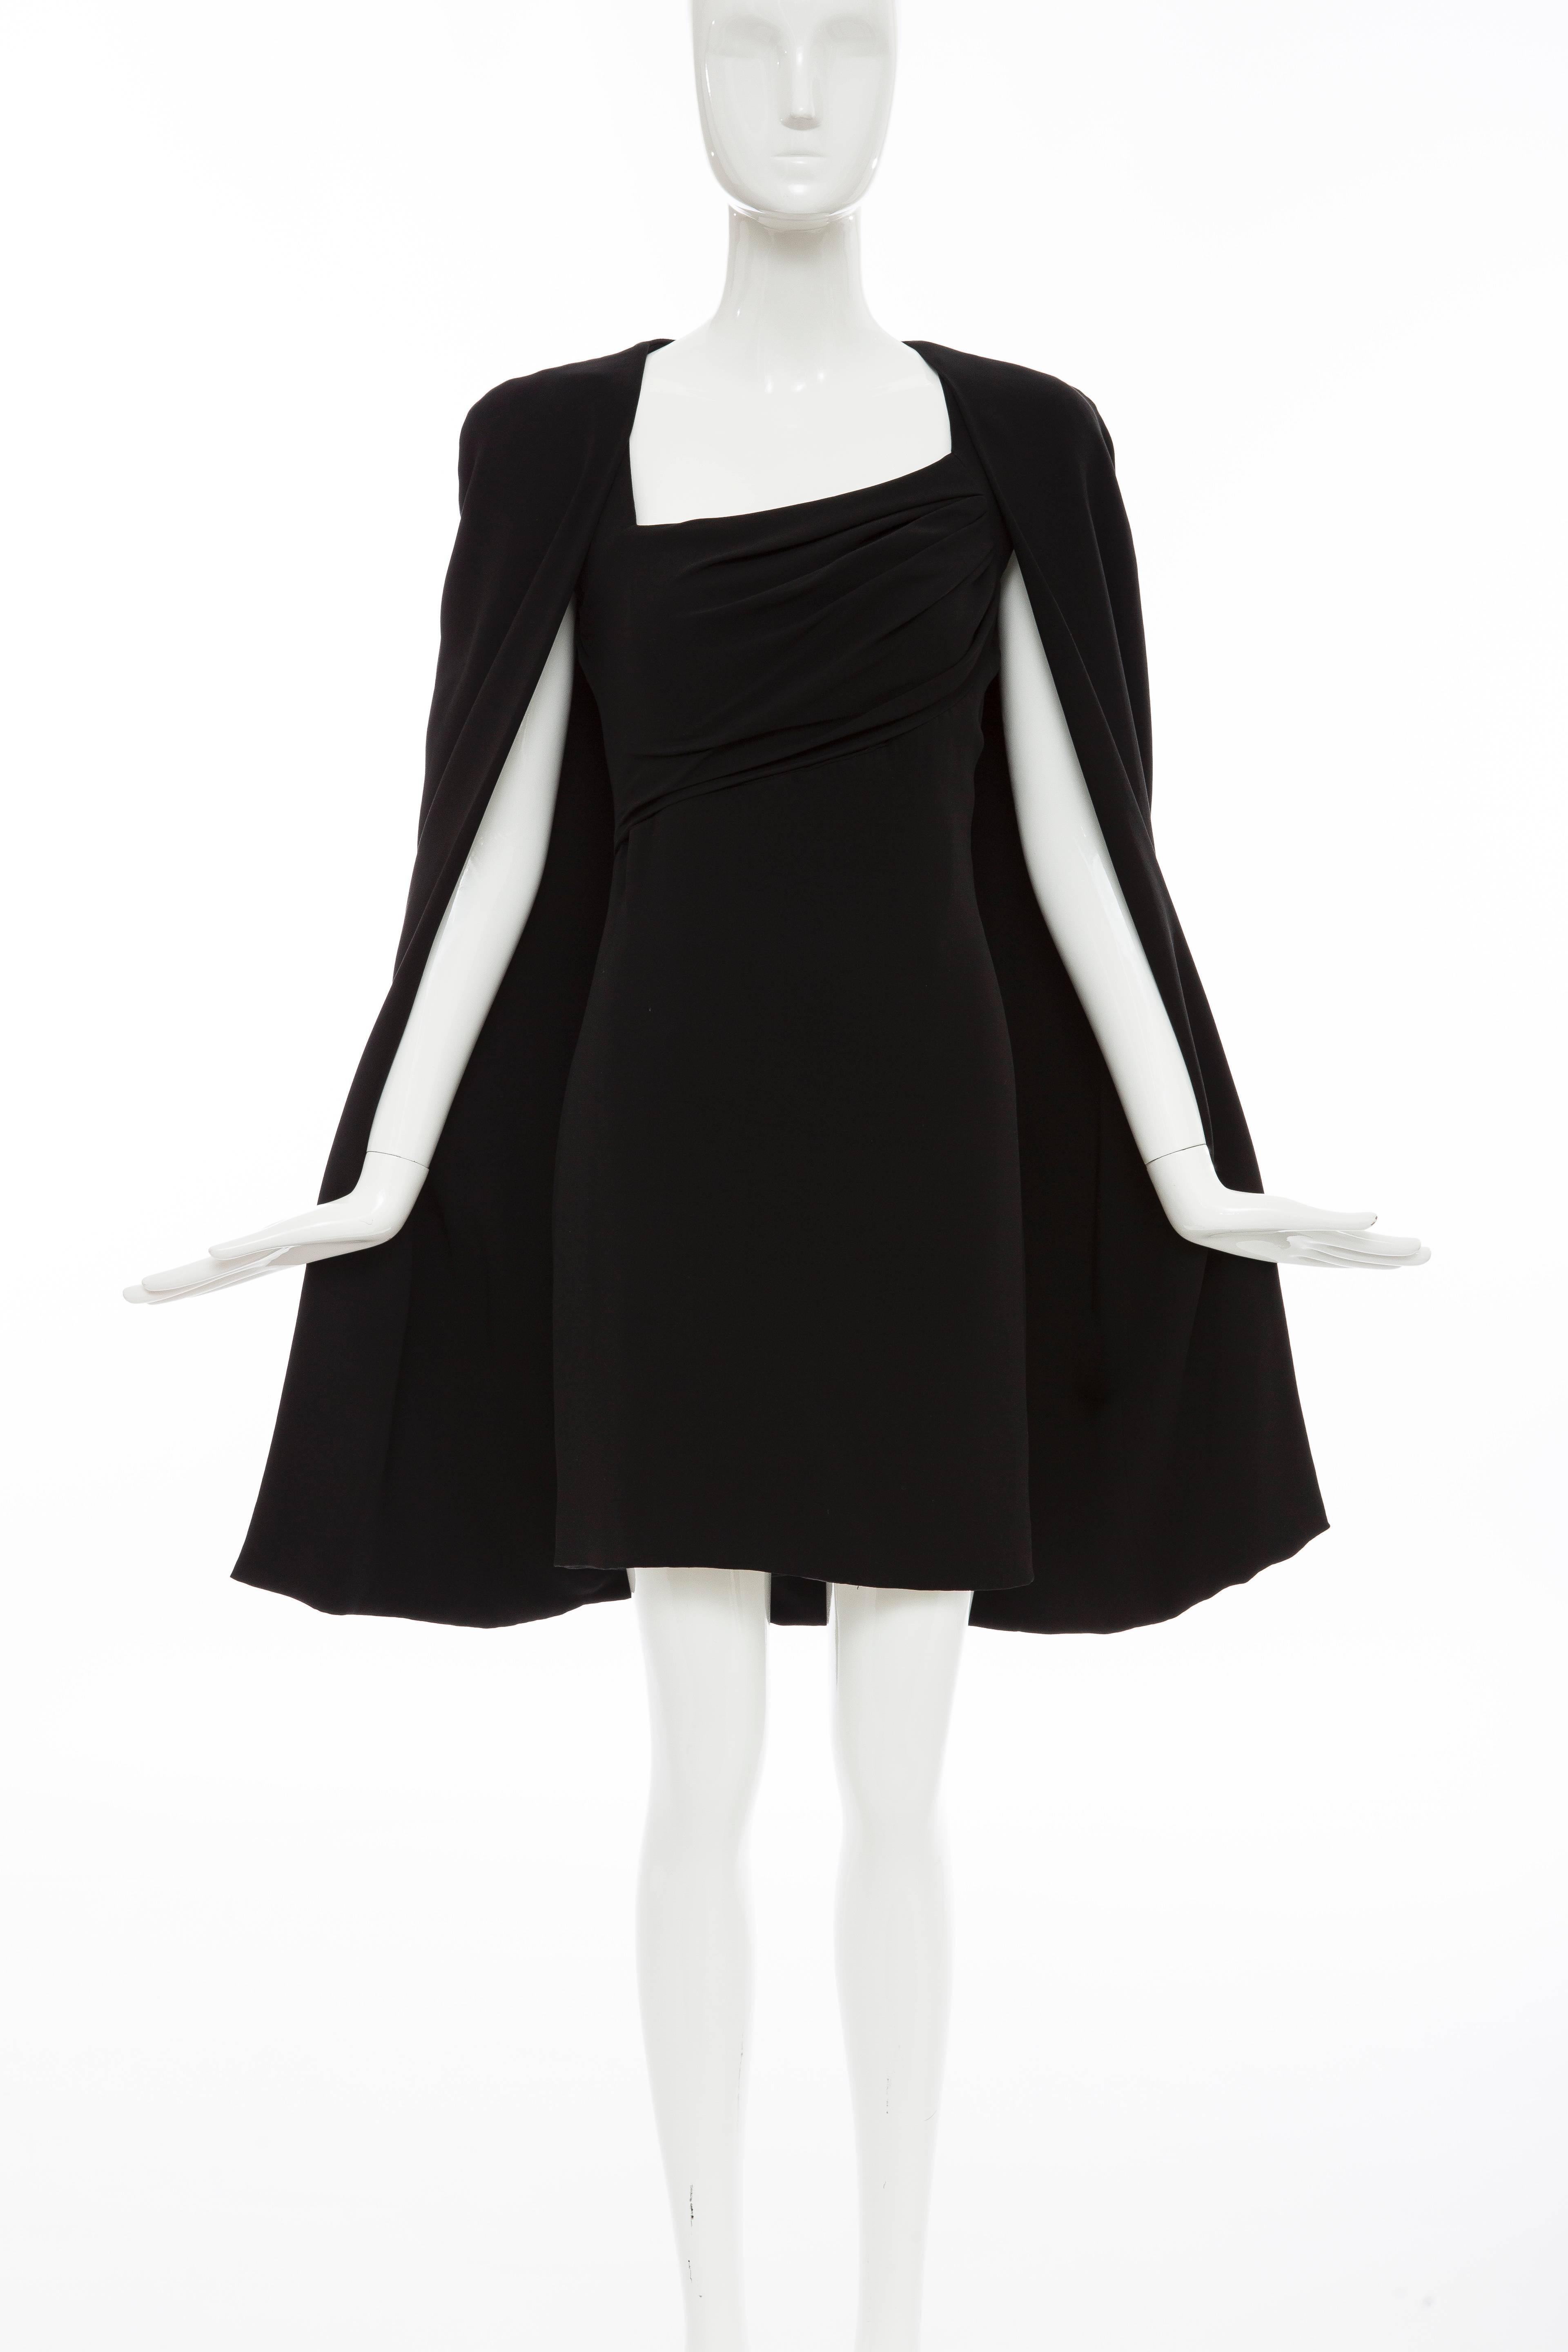 Tom Ford, Autumn-Winter 2012, silk evening dress ensemble. Cape features tonal stitching throughout and open front. Dress features cap sleeves,  asymmetrical pleating at bust, concealed zip closure at back and fully lined.

Fabric: 97% Silk, 35